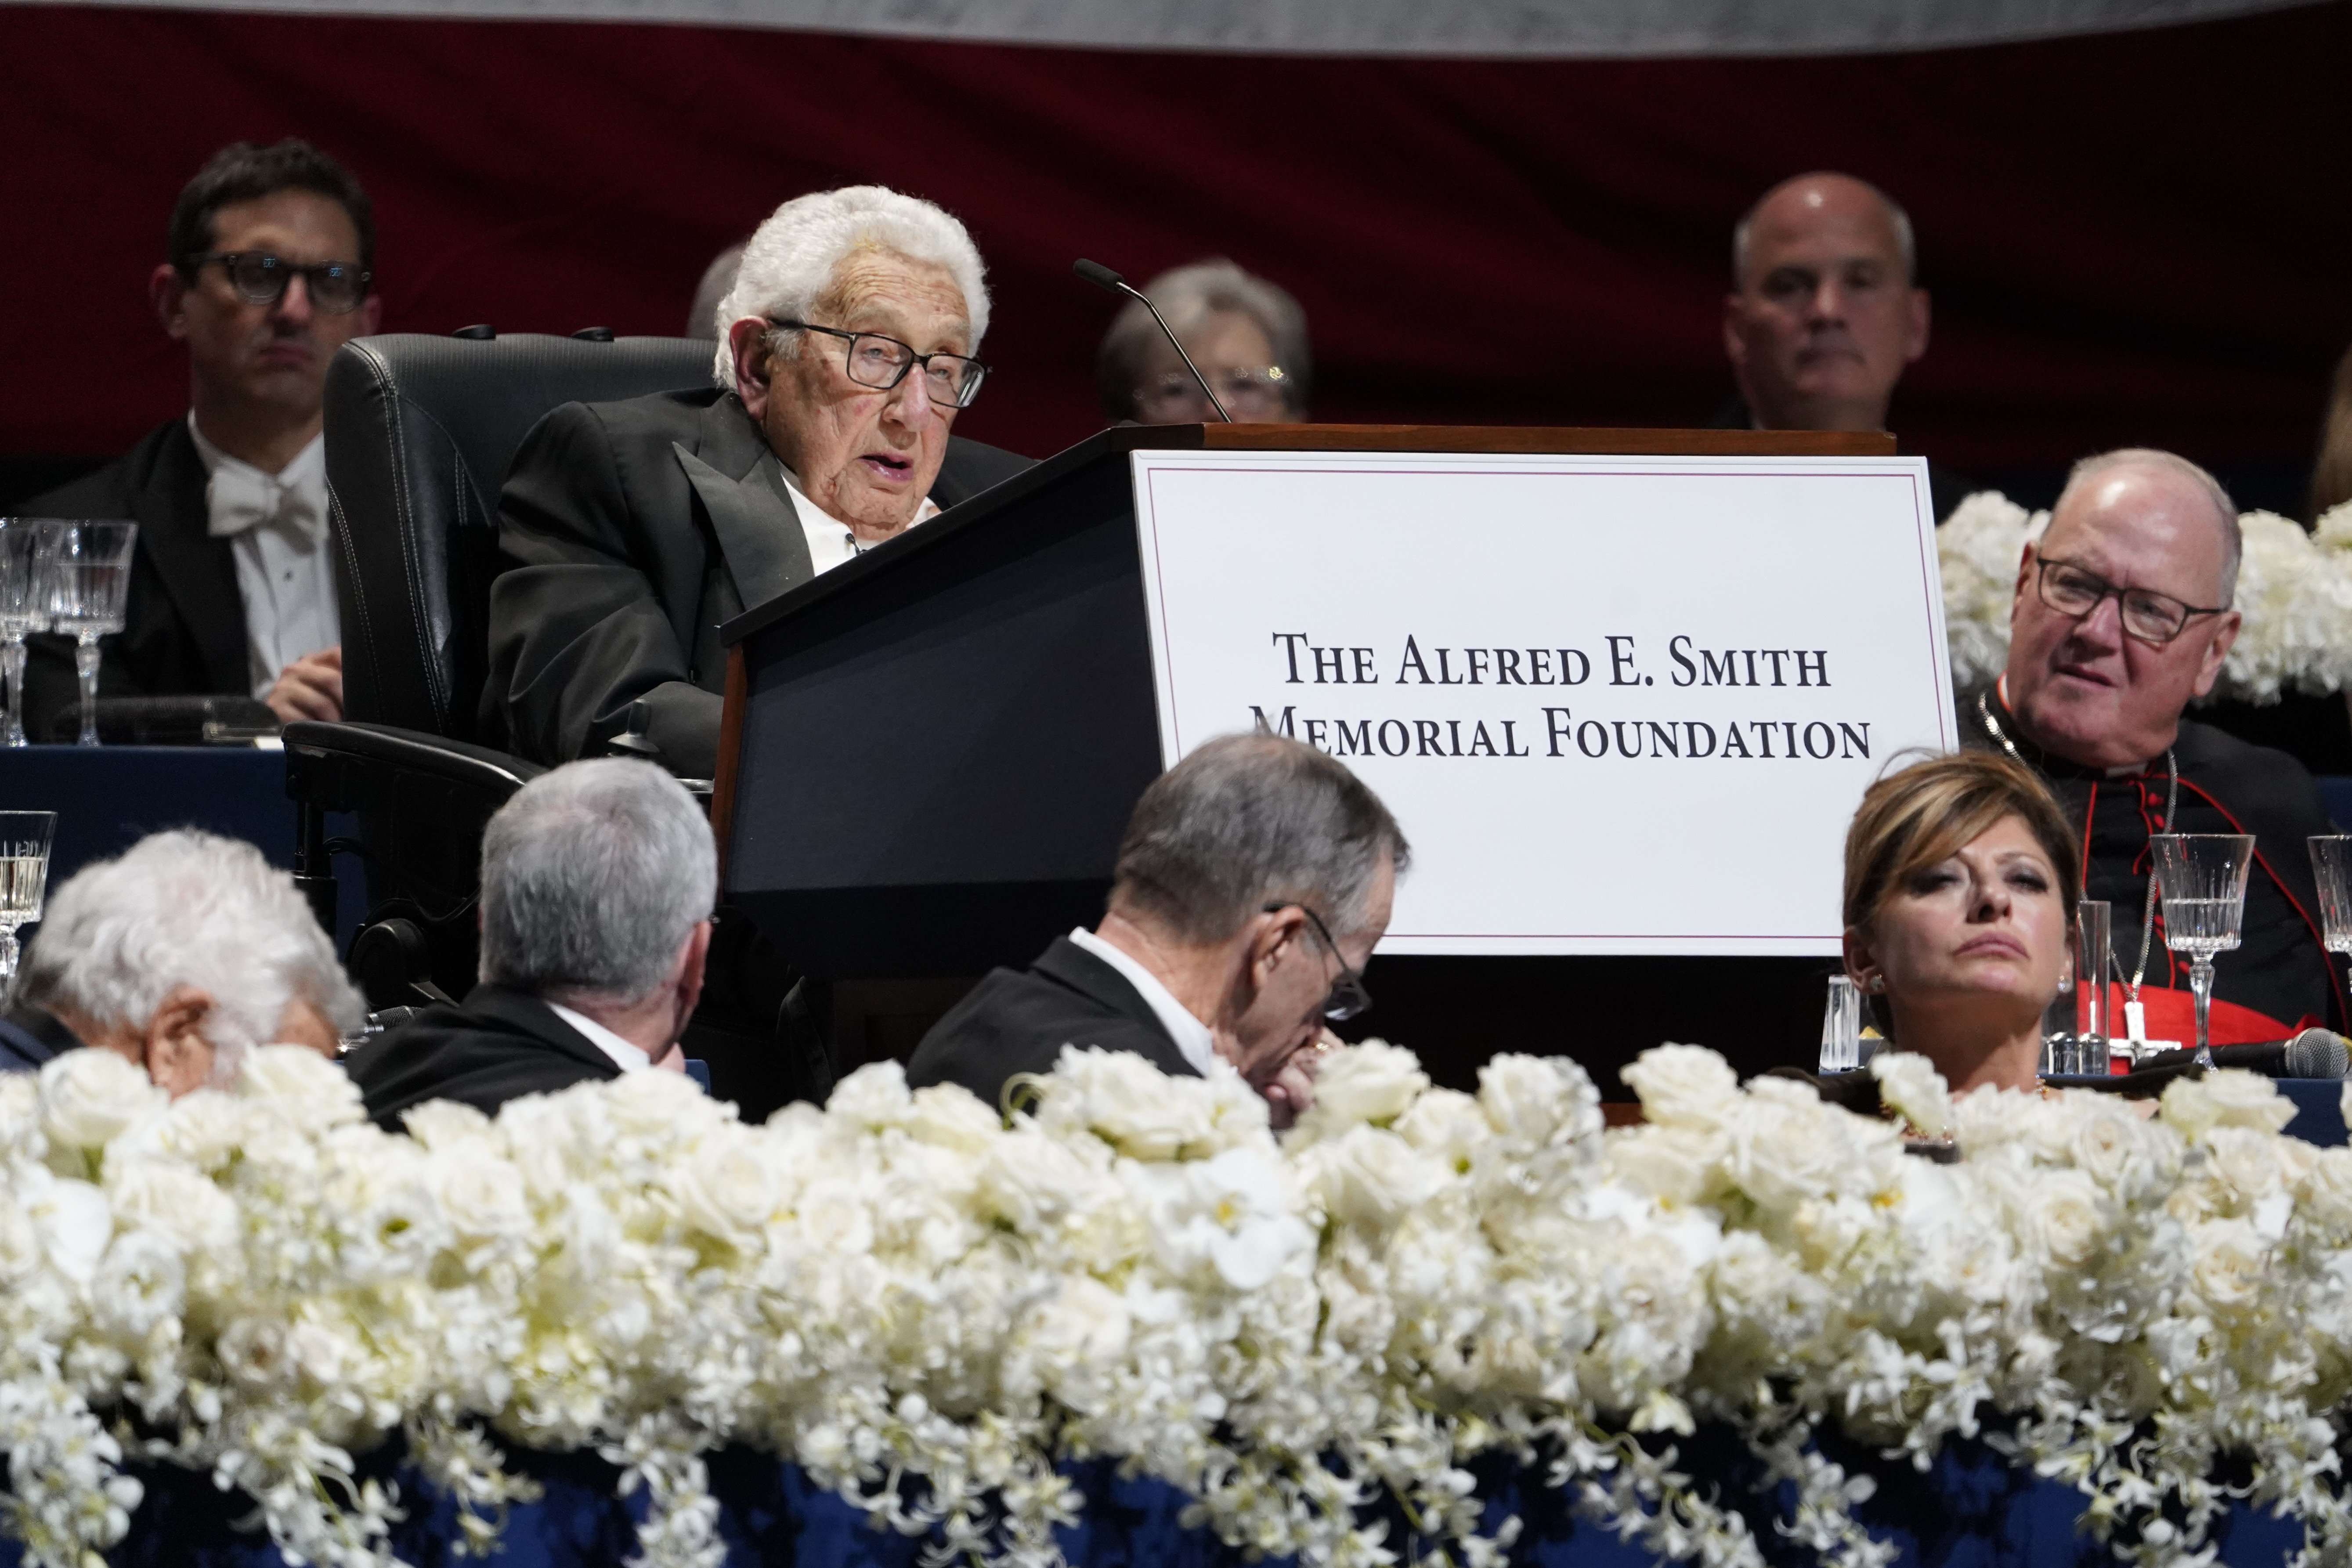 Former U.S. Secretary of State Henry Kissinger delivers the keynote address during the 78th annual Alfred E. Smith Memorial Foundation Dinner at the Park Avenue Armory Oct. 19 in New York City. (OSV News/Gregory A. Shemitz)